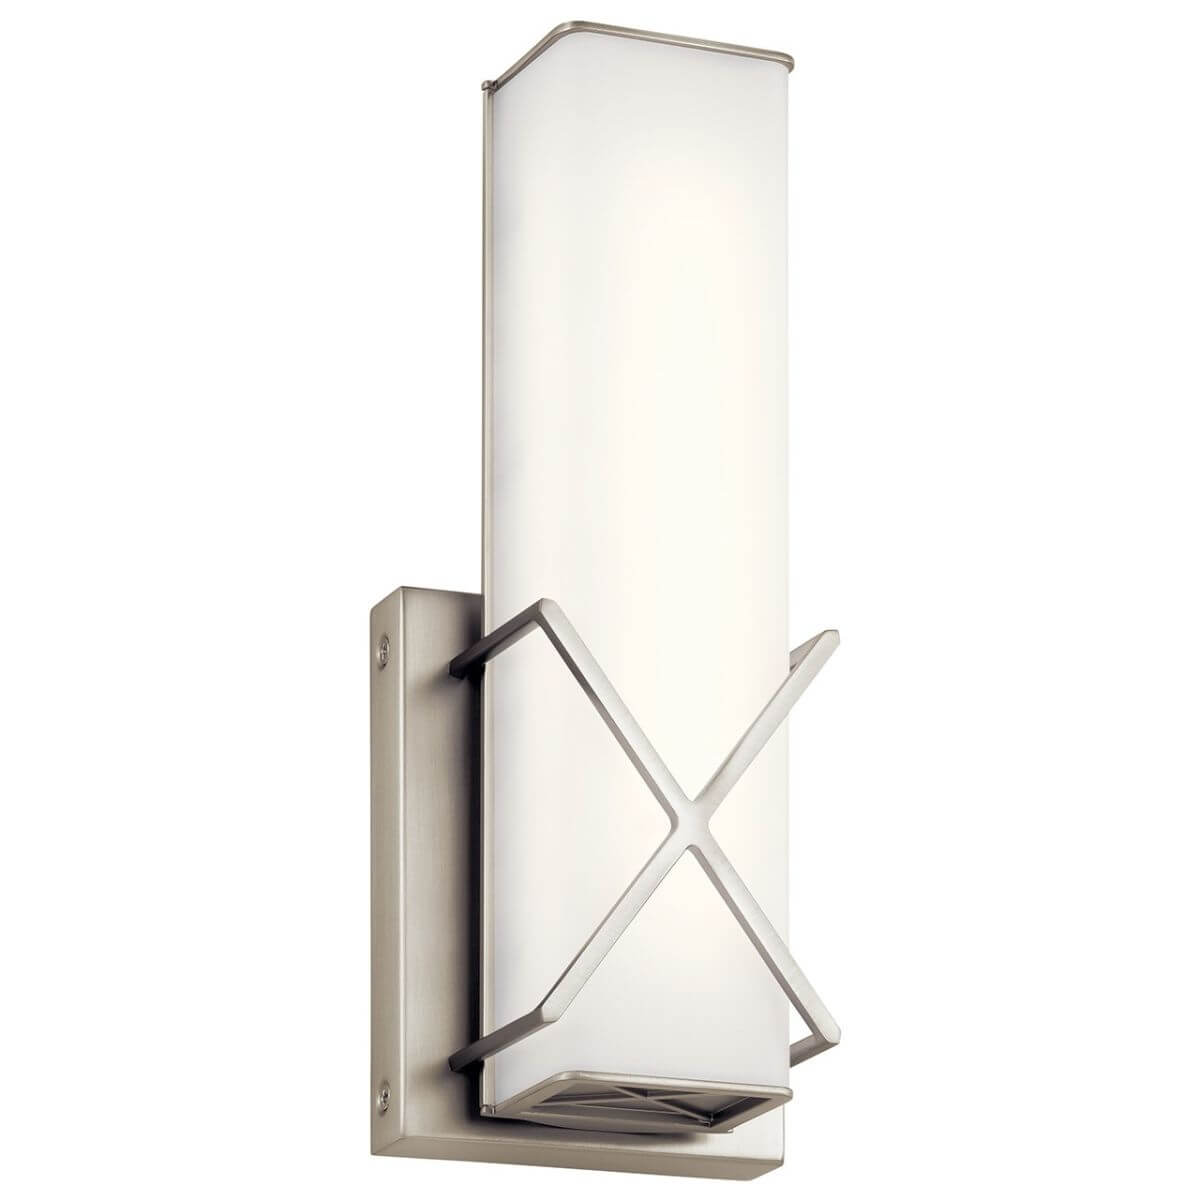 12 inch Tall LED Wall Sconce in Brushed Nickel with Satin Etched White Glass - 239753